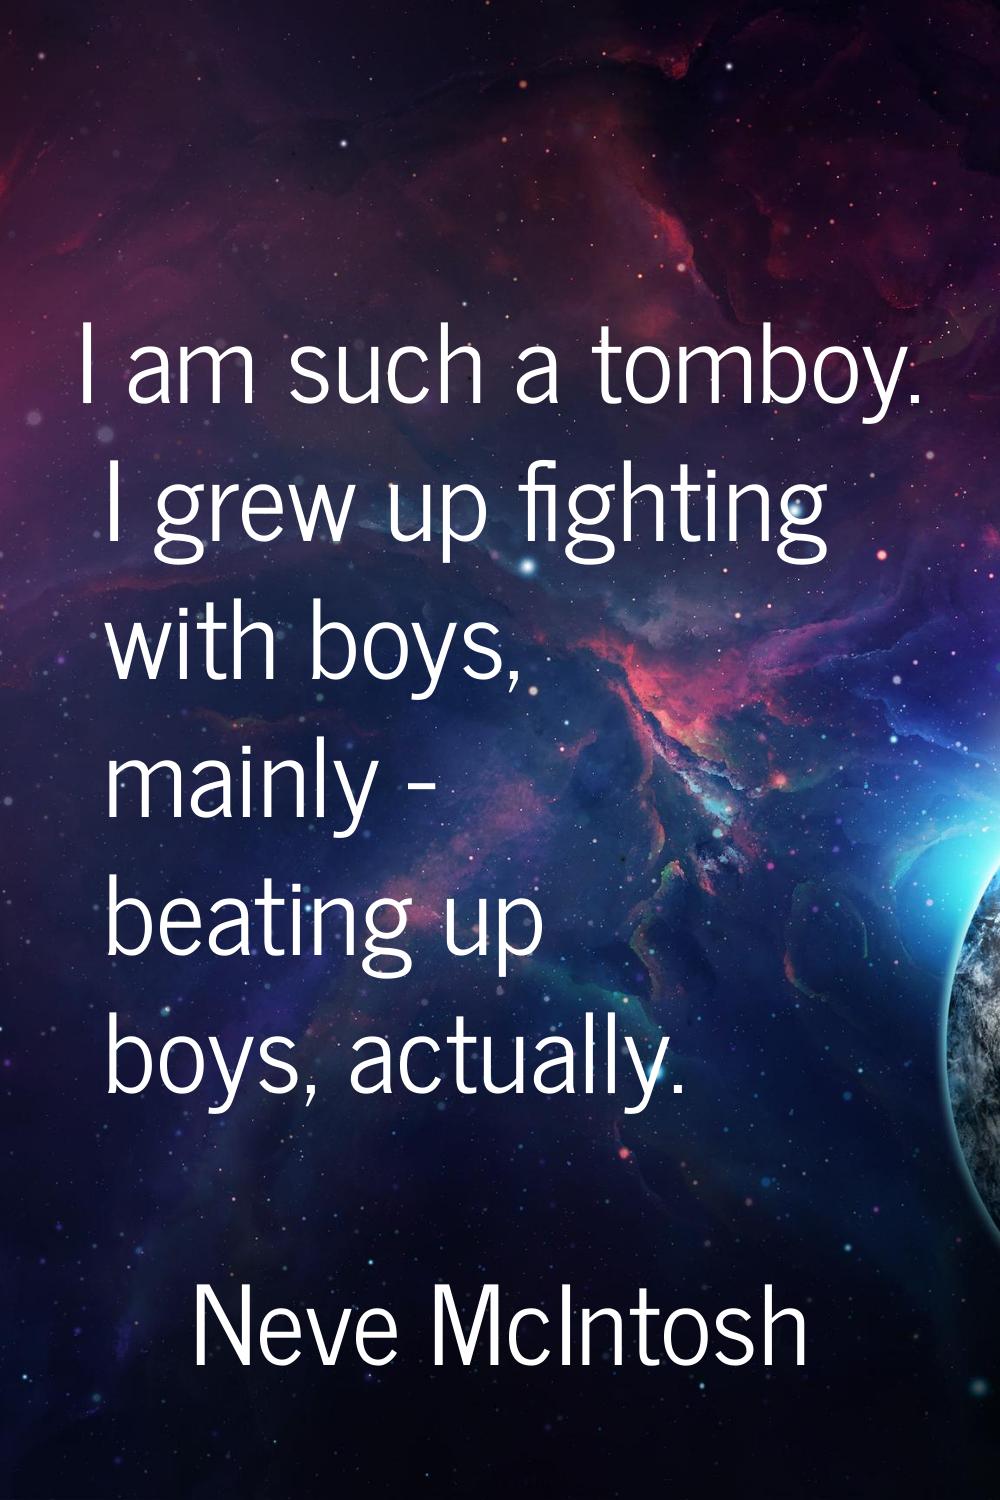 I am such a tomboy. I grew up fighting with boys, mainly - beating up boys, actually.